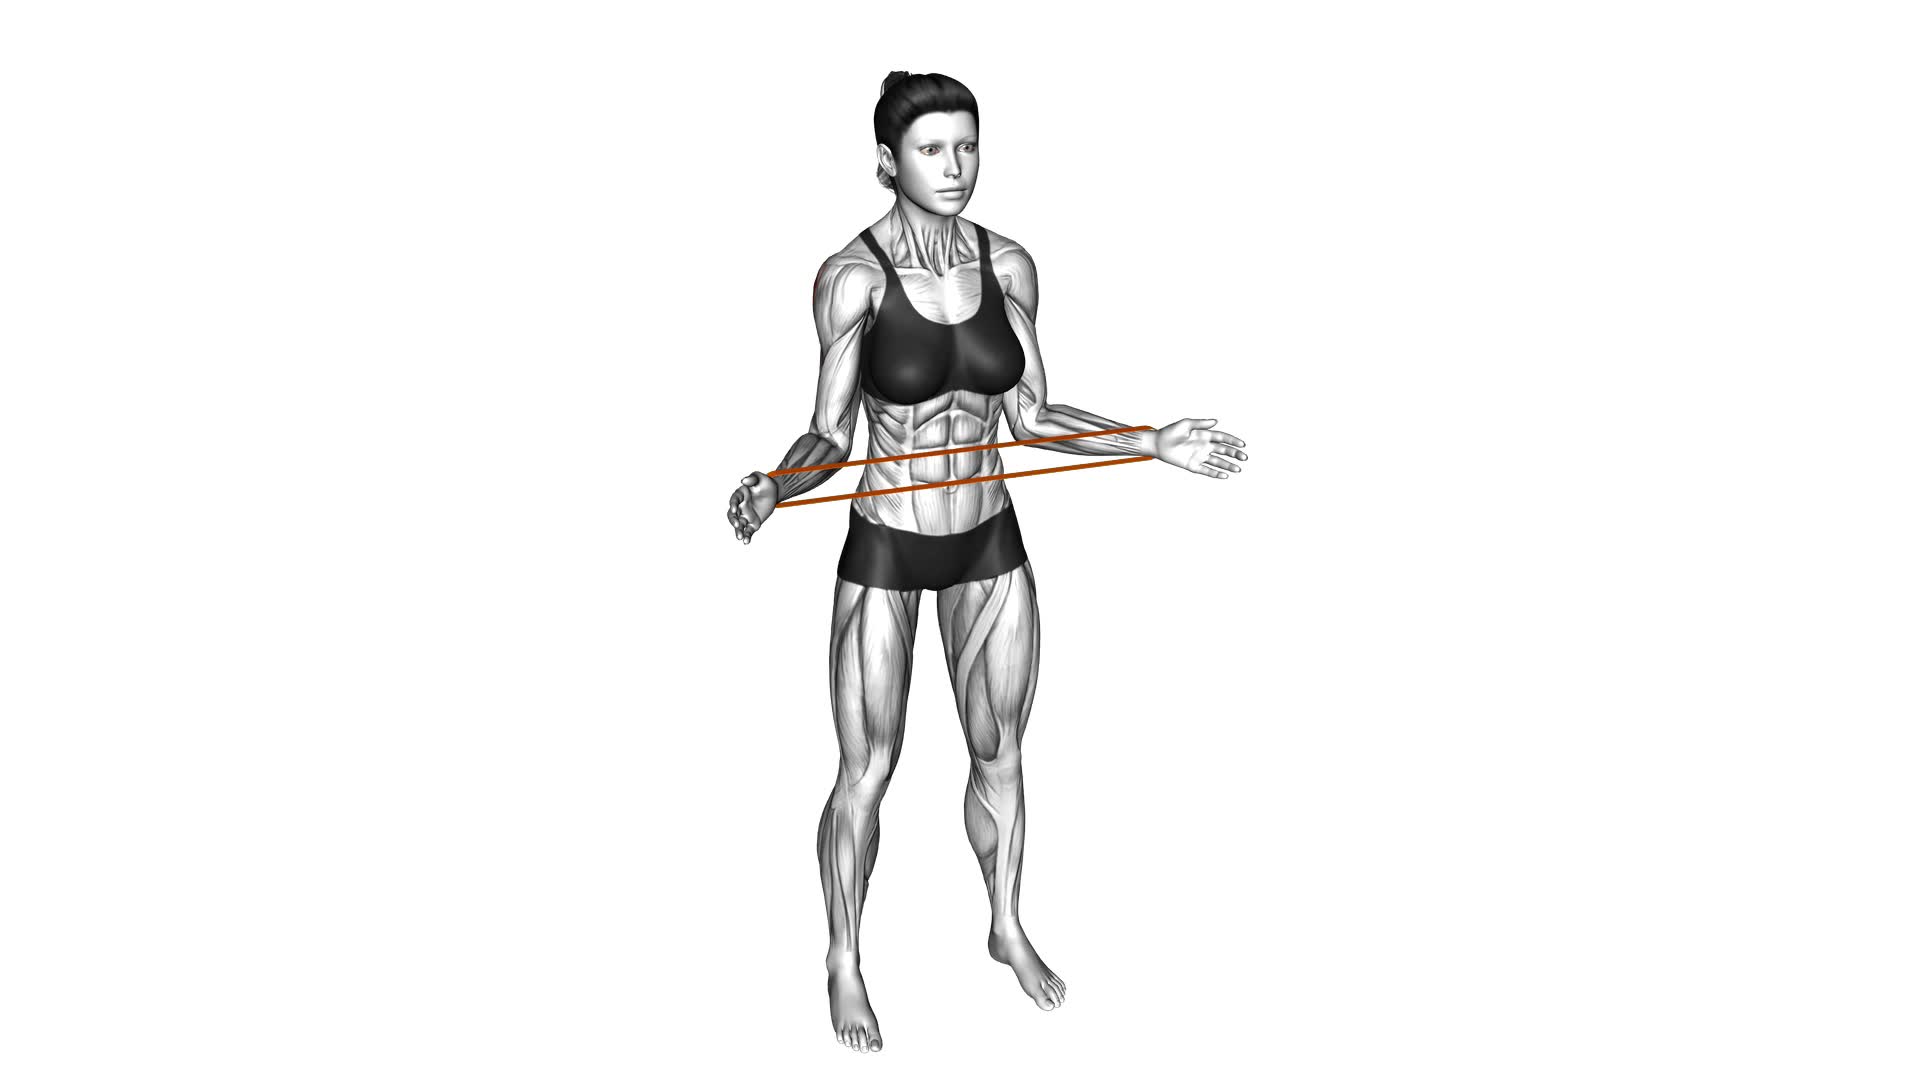 Resistance Band Standing External Rotation (female) - Video Exercise Guide & Tips